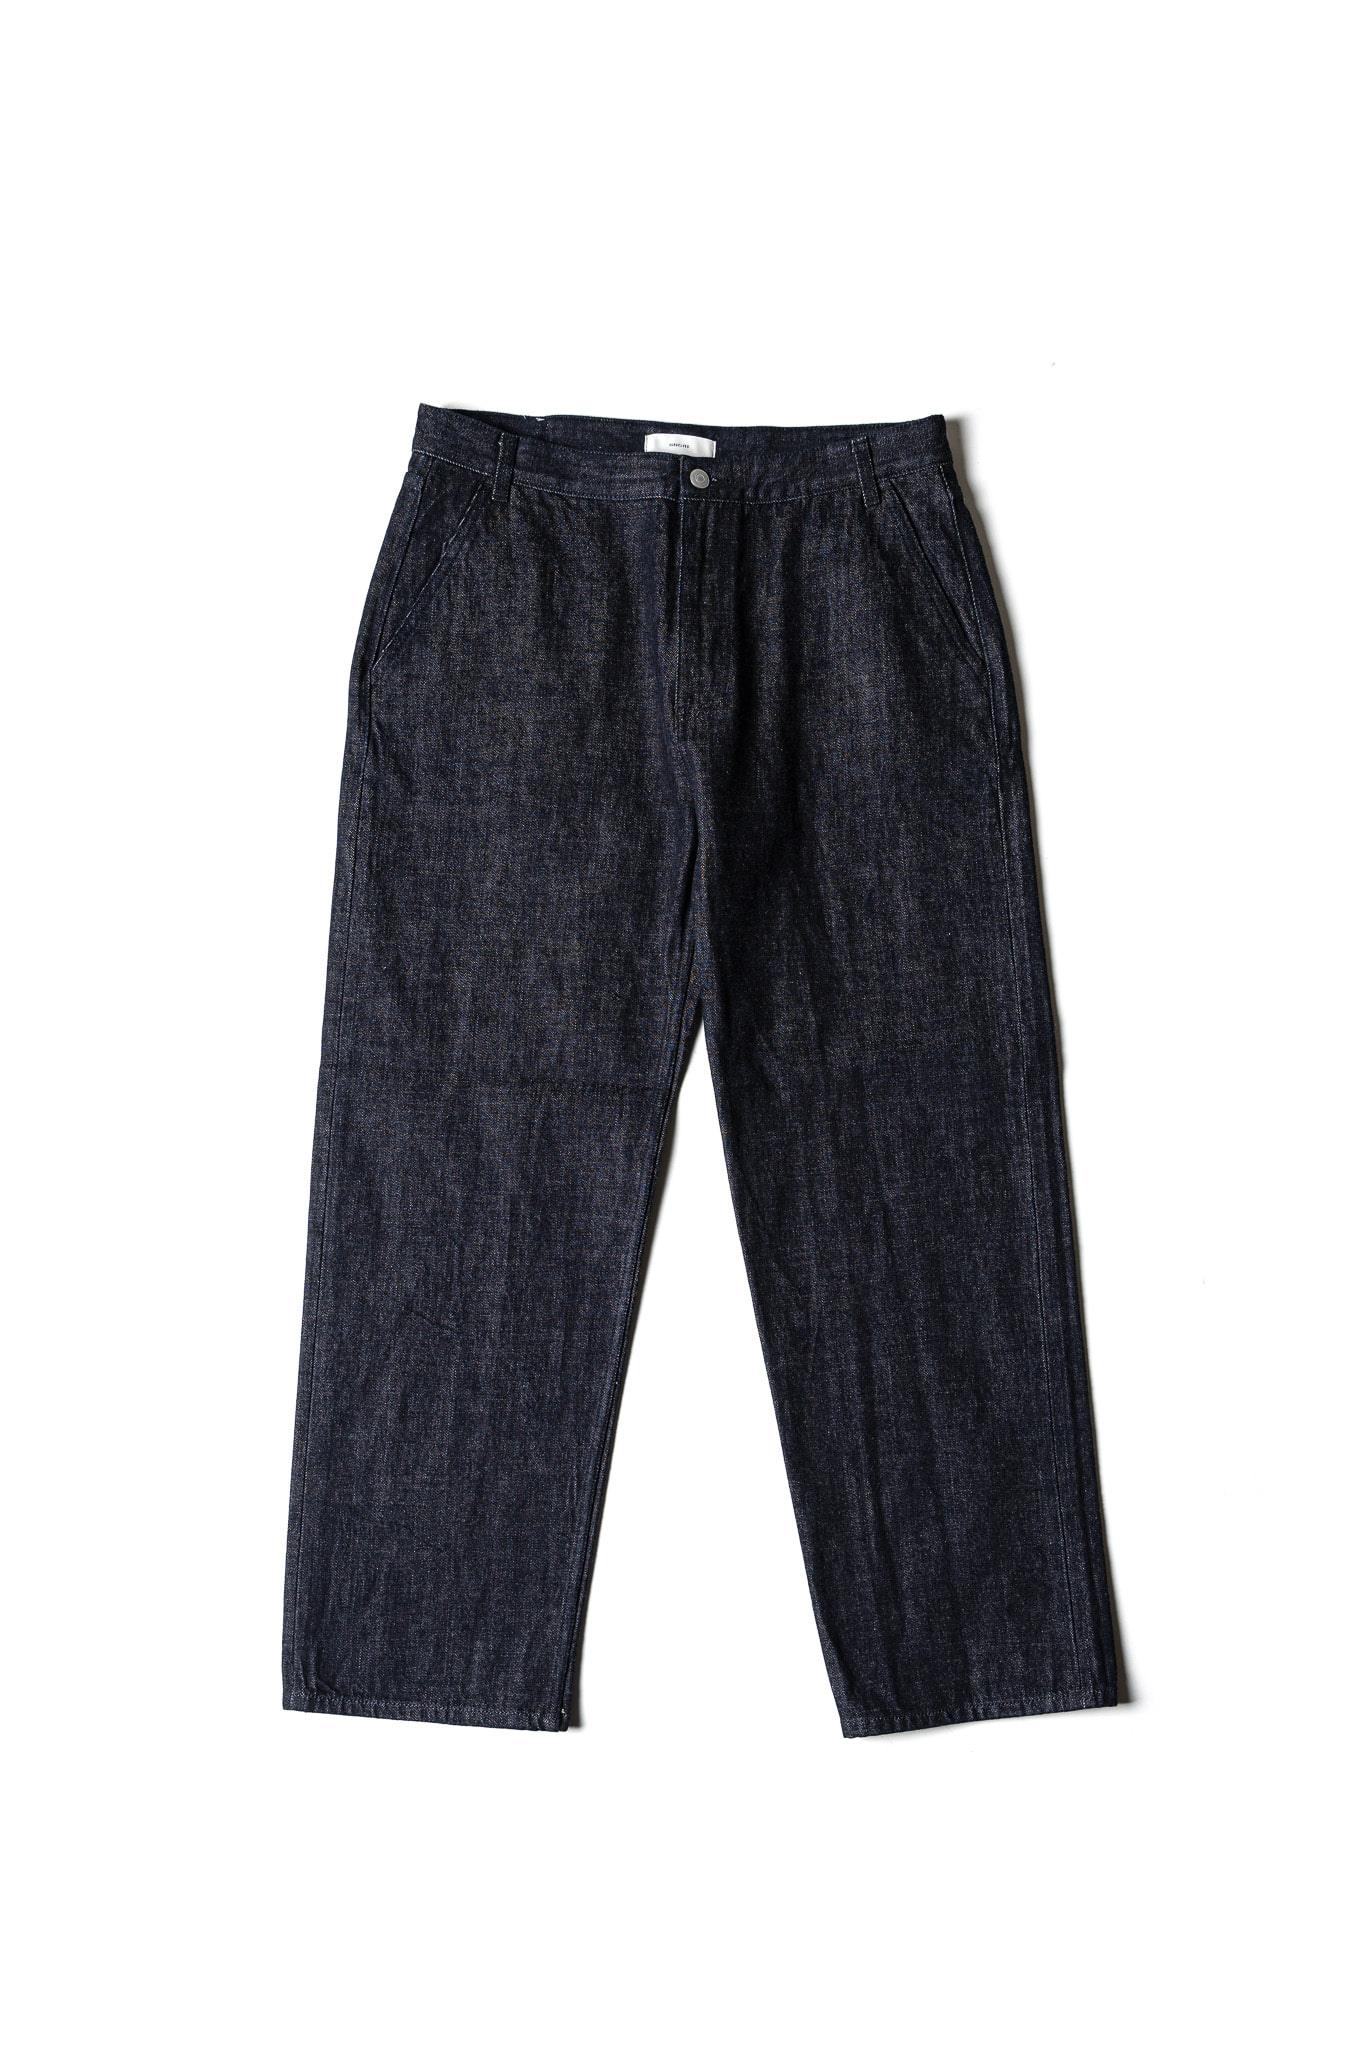 [RESTOCK] ORGANIC COTTON RELAXED DENIM PANTS (one-wash)